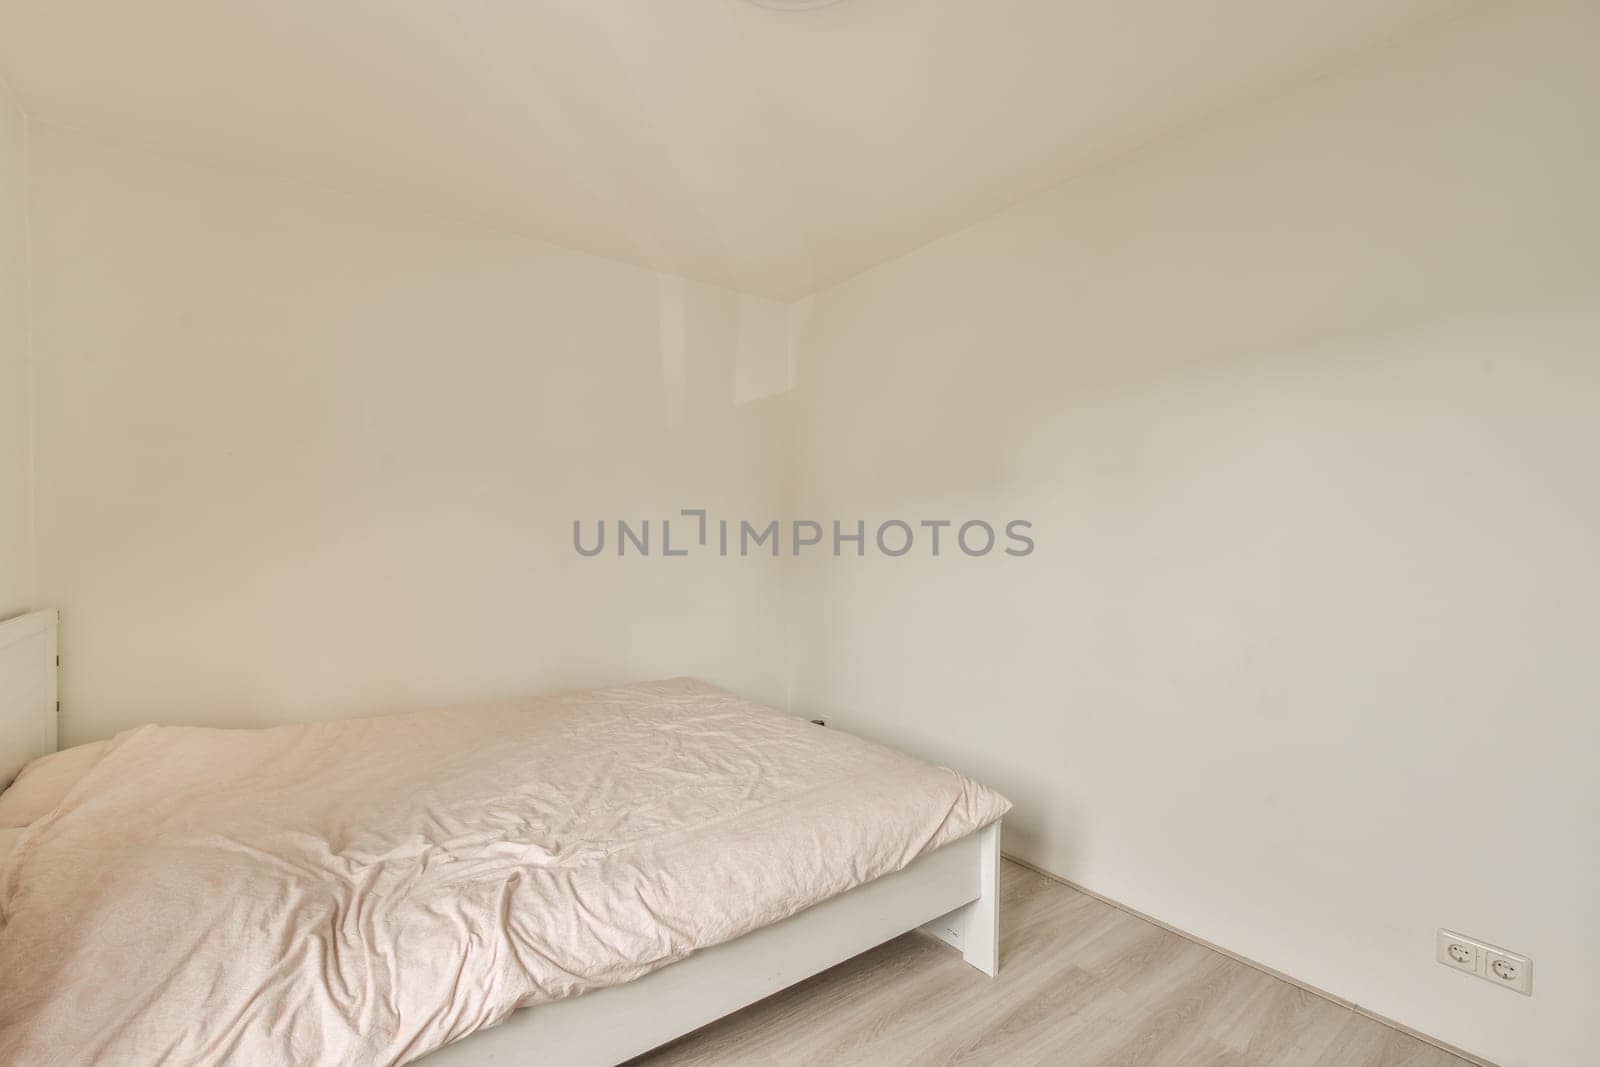 a bed in the corner of a room with white walls and wood flooring on the right side of the room